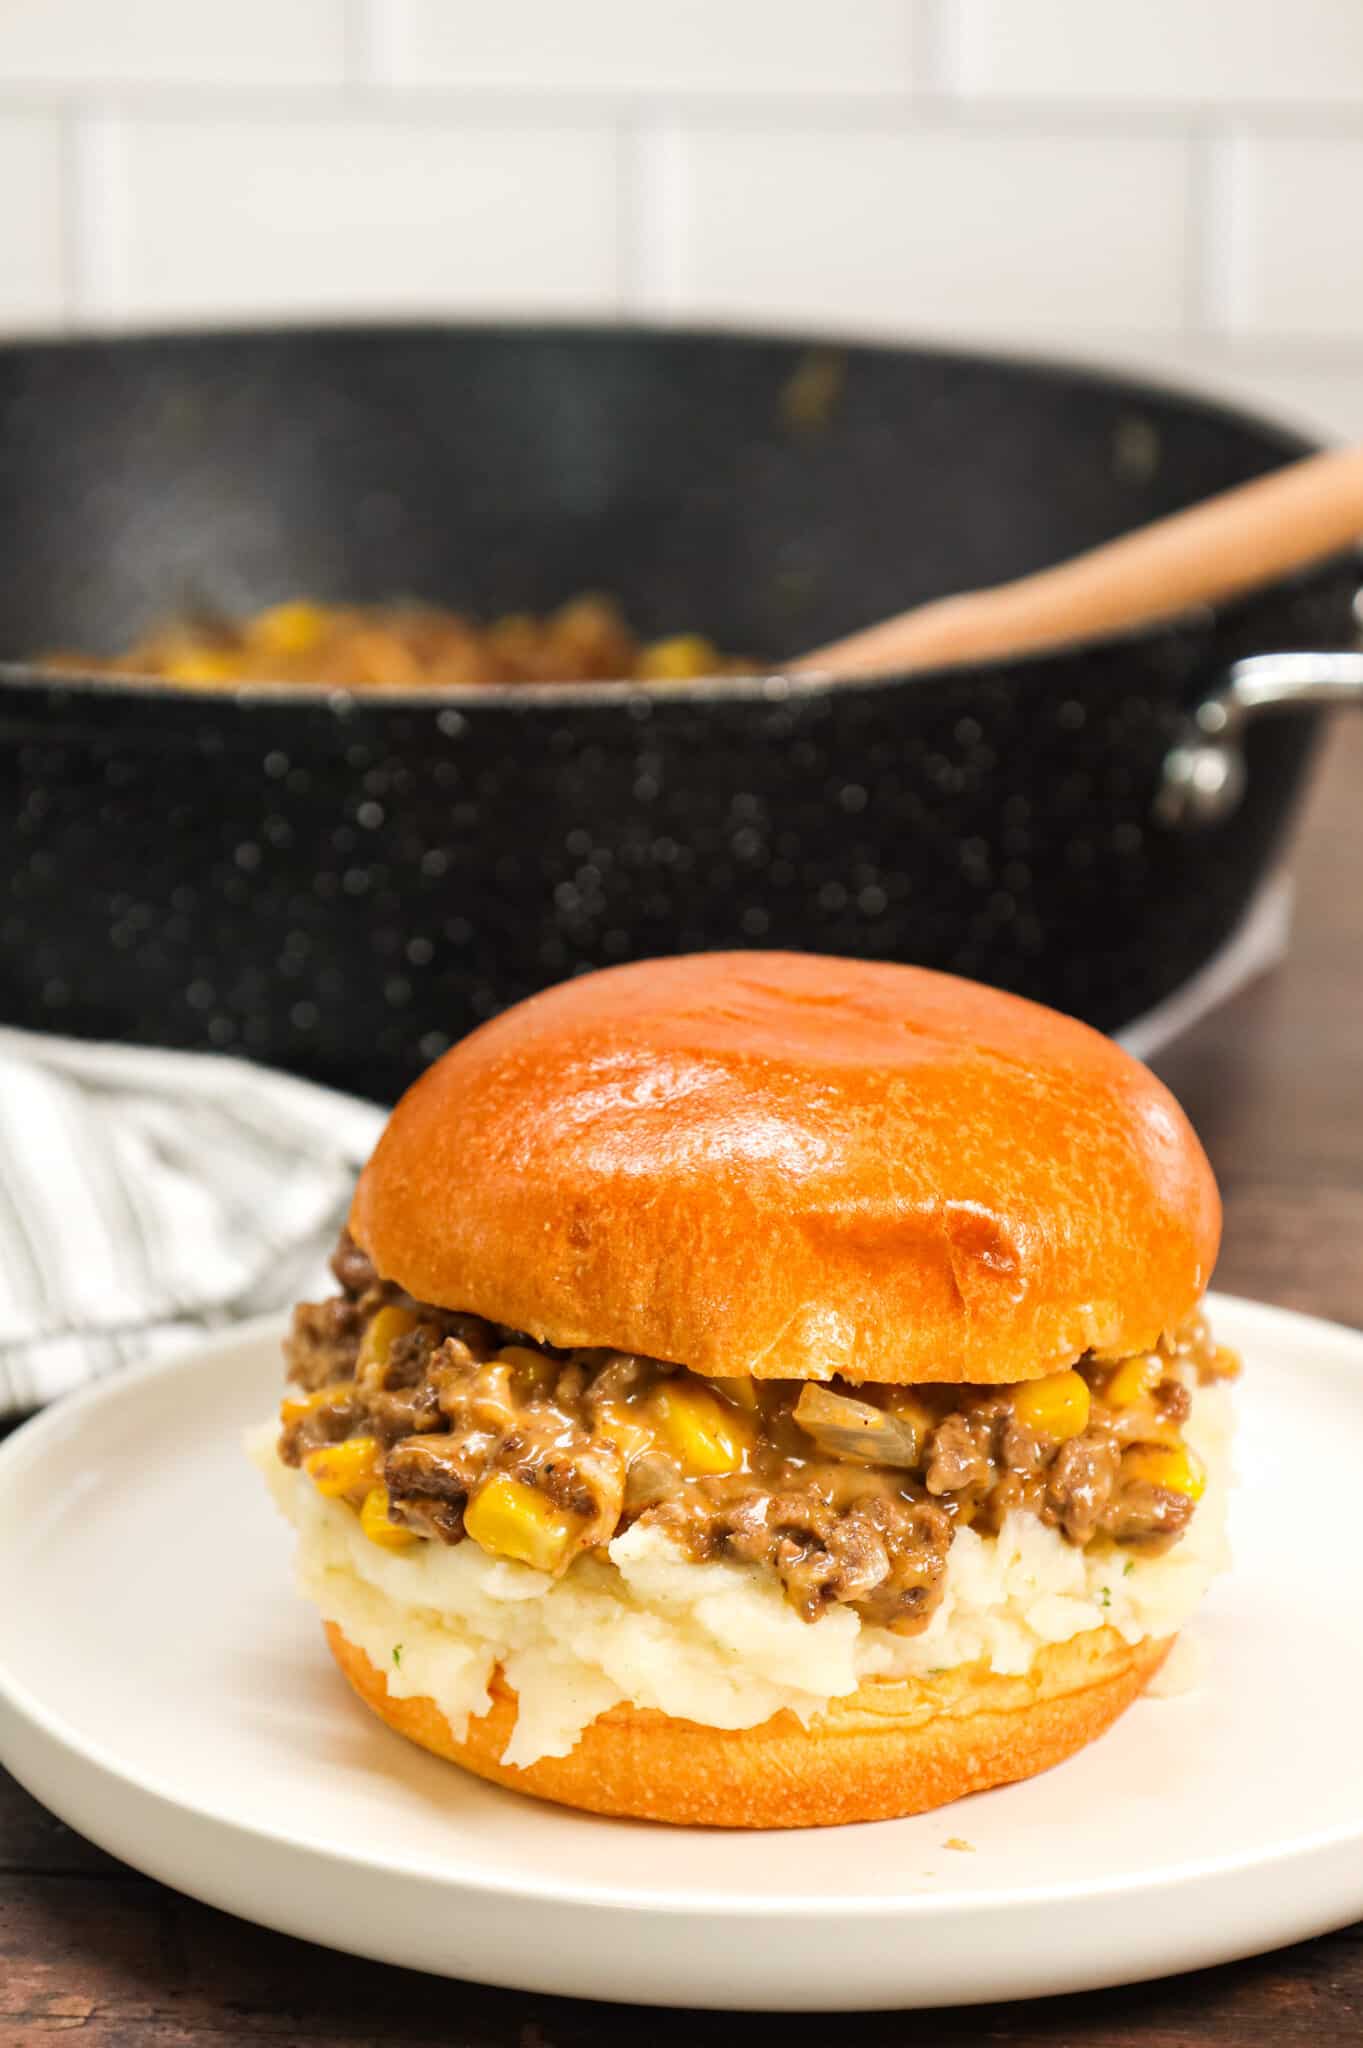 Shepherd's Pie Sloppy Joes are a hearty ground beef dinner recipe made with instant mashed potatoes, corn, diced onions, brown gravy mix and shredded cheese all served on toasted Brioche buns.